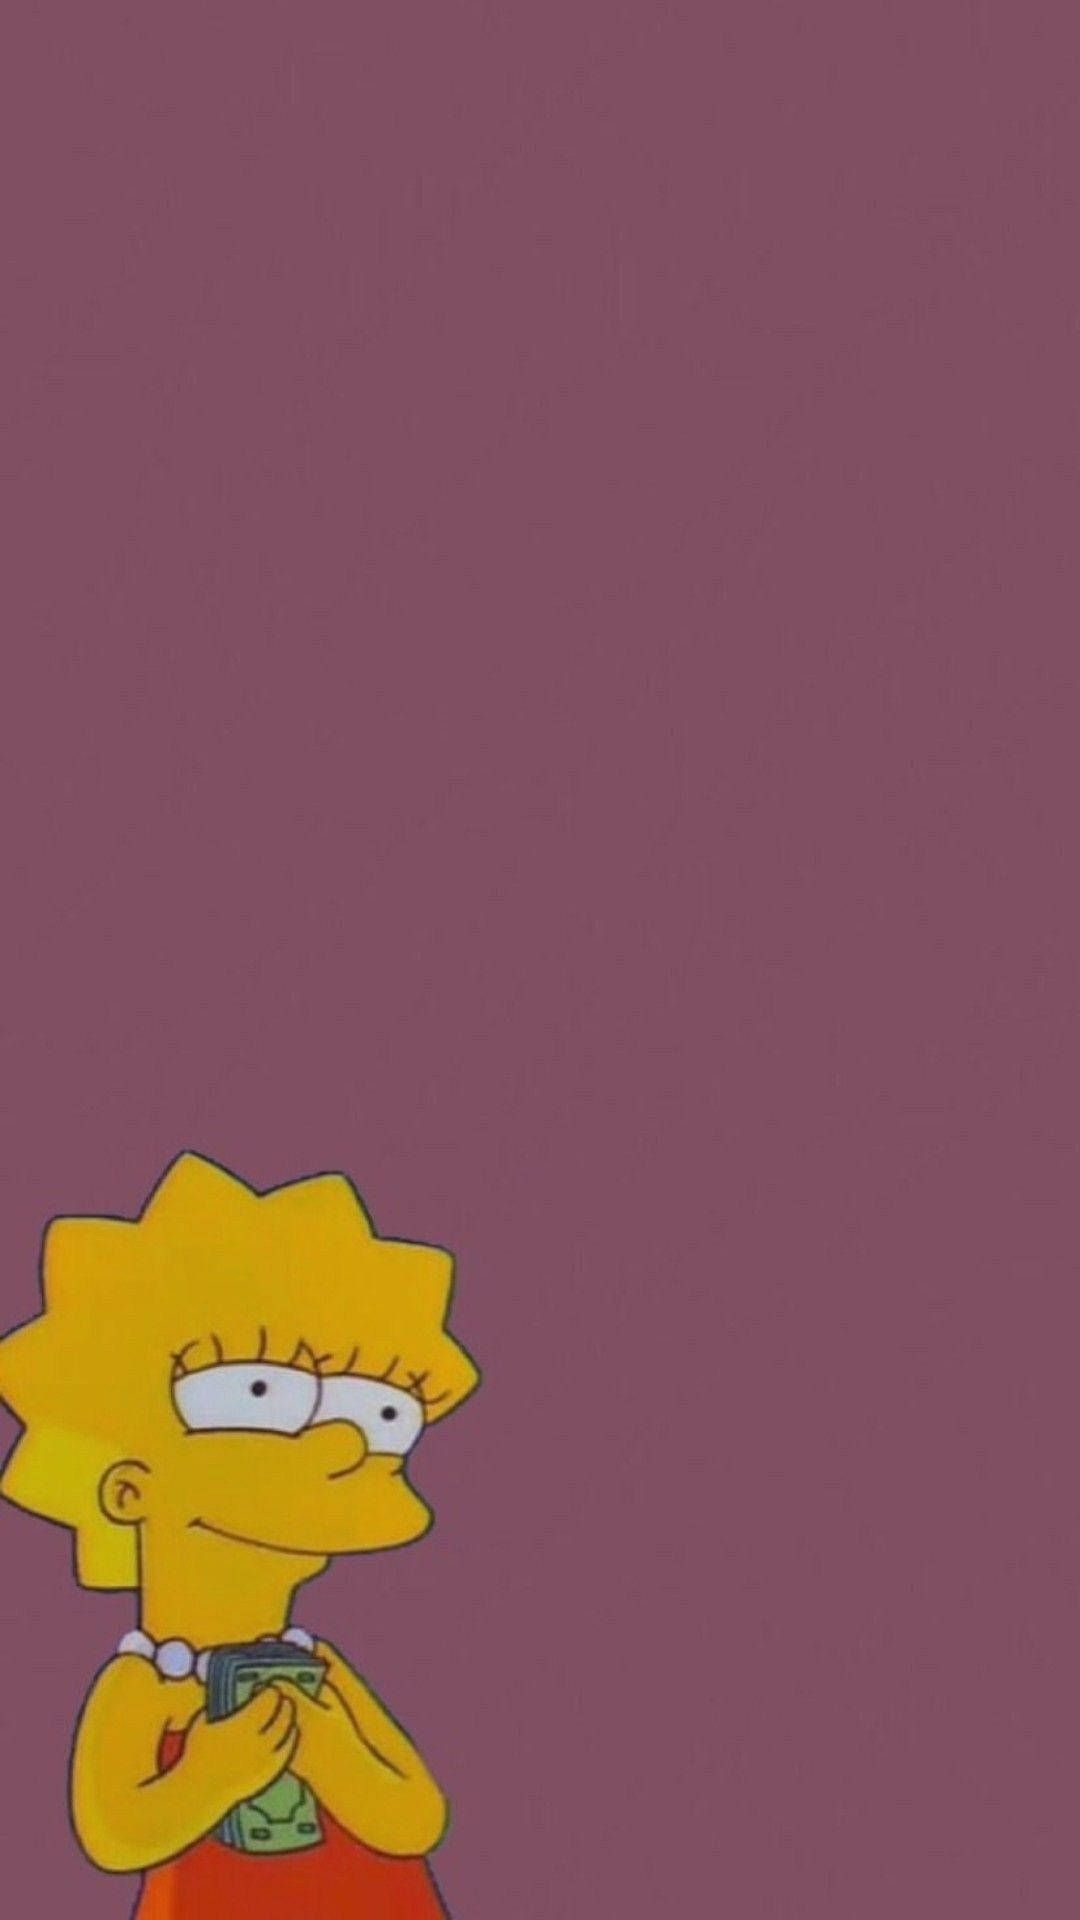 The simpsons wallpaper with a purple background - The Simpsons